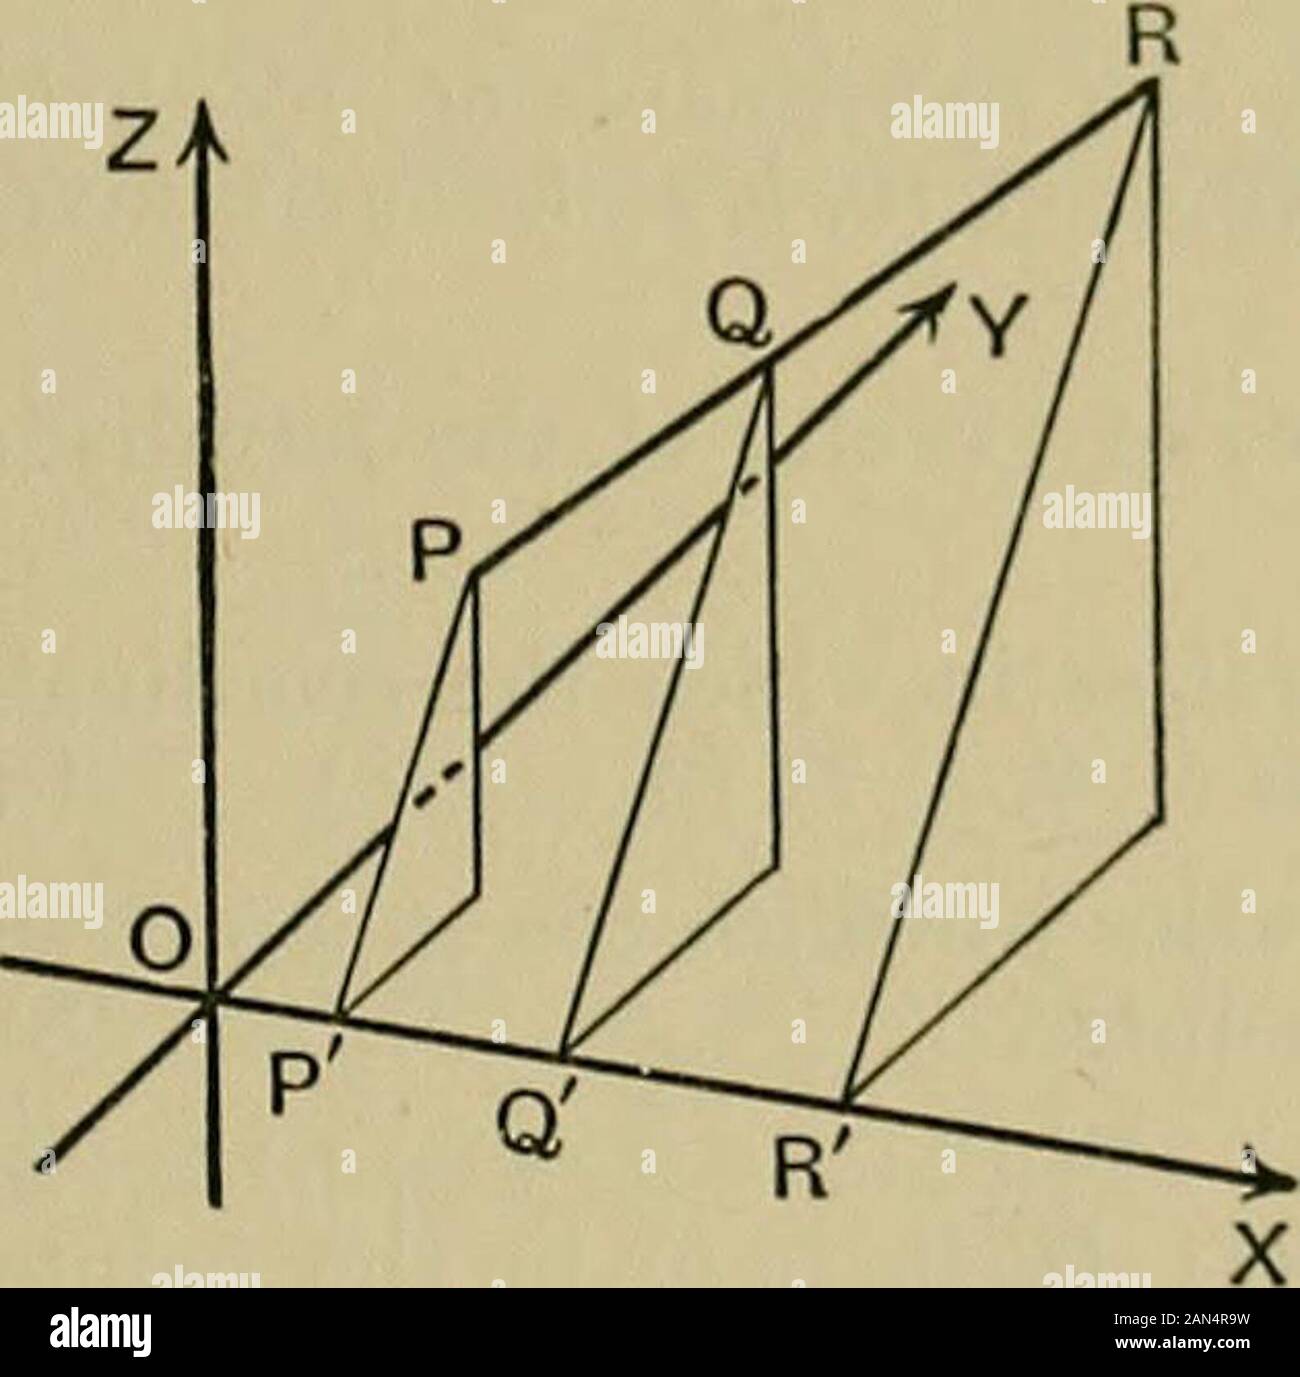 An elementary treatise on coordinate geometry of three dimensions . z. Find theequations satisfied by x, y, z, if (i) PA = PB, (ii) PA2+PB2 = 2F,(iii) PA2-PB2 = 2£2. A ns. (i) 8x + 2y + Mz + 9 = 0, (ii) 2x2 + 2/ + 2s2 - 4x -Uy + 4z +109 = 2k2,(iii) 8x + 2y + 24z + 9 + 2k2 = 0. §§7,8] CHANGE OF ORIGIN Ex 4. Kind Lli&lt; r.,-i,- &lt;,! the sphere through bh(0,0,0), (0,2,0), (1,0,0), (0,0, I). •!? (i Ex. 5. Find the equation to the sphere whose centre is(0, IandradiusS. 4«* .?••t-//-+ ;-- 8y+2»-SL Ex.6. Prove thai aP-y*+#-4&+2y+(te+l2 0 repreaenlright circular cone whose eertea is the point (2, I Stock Photo